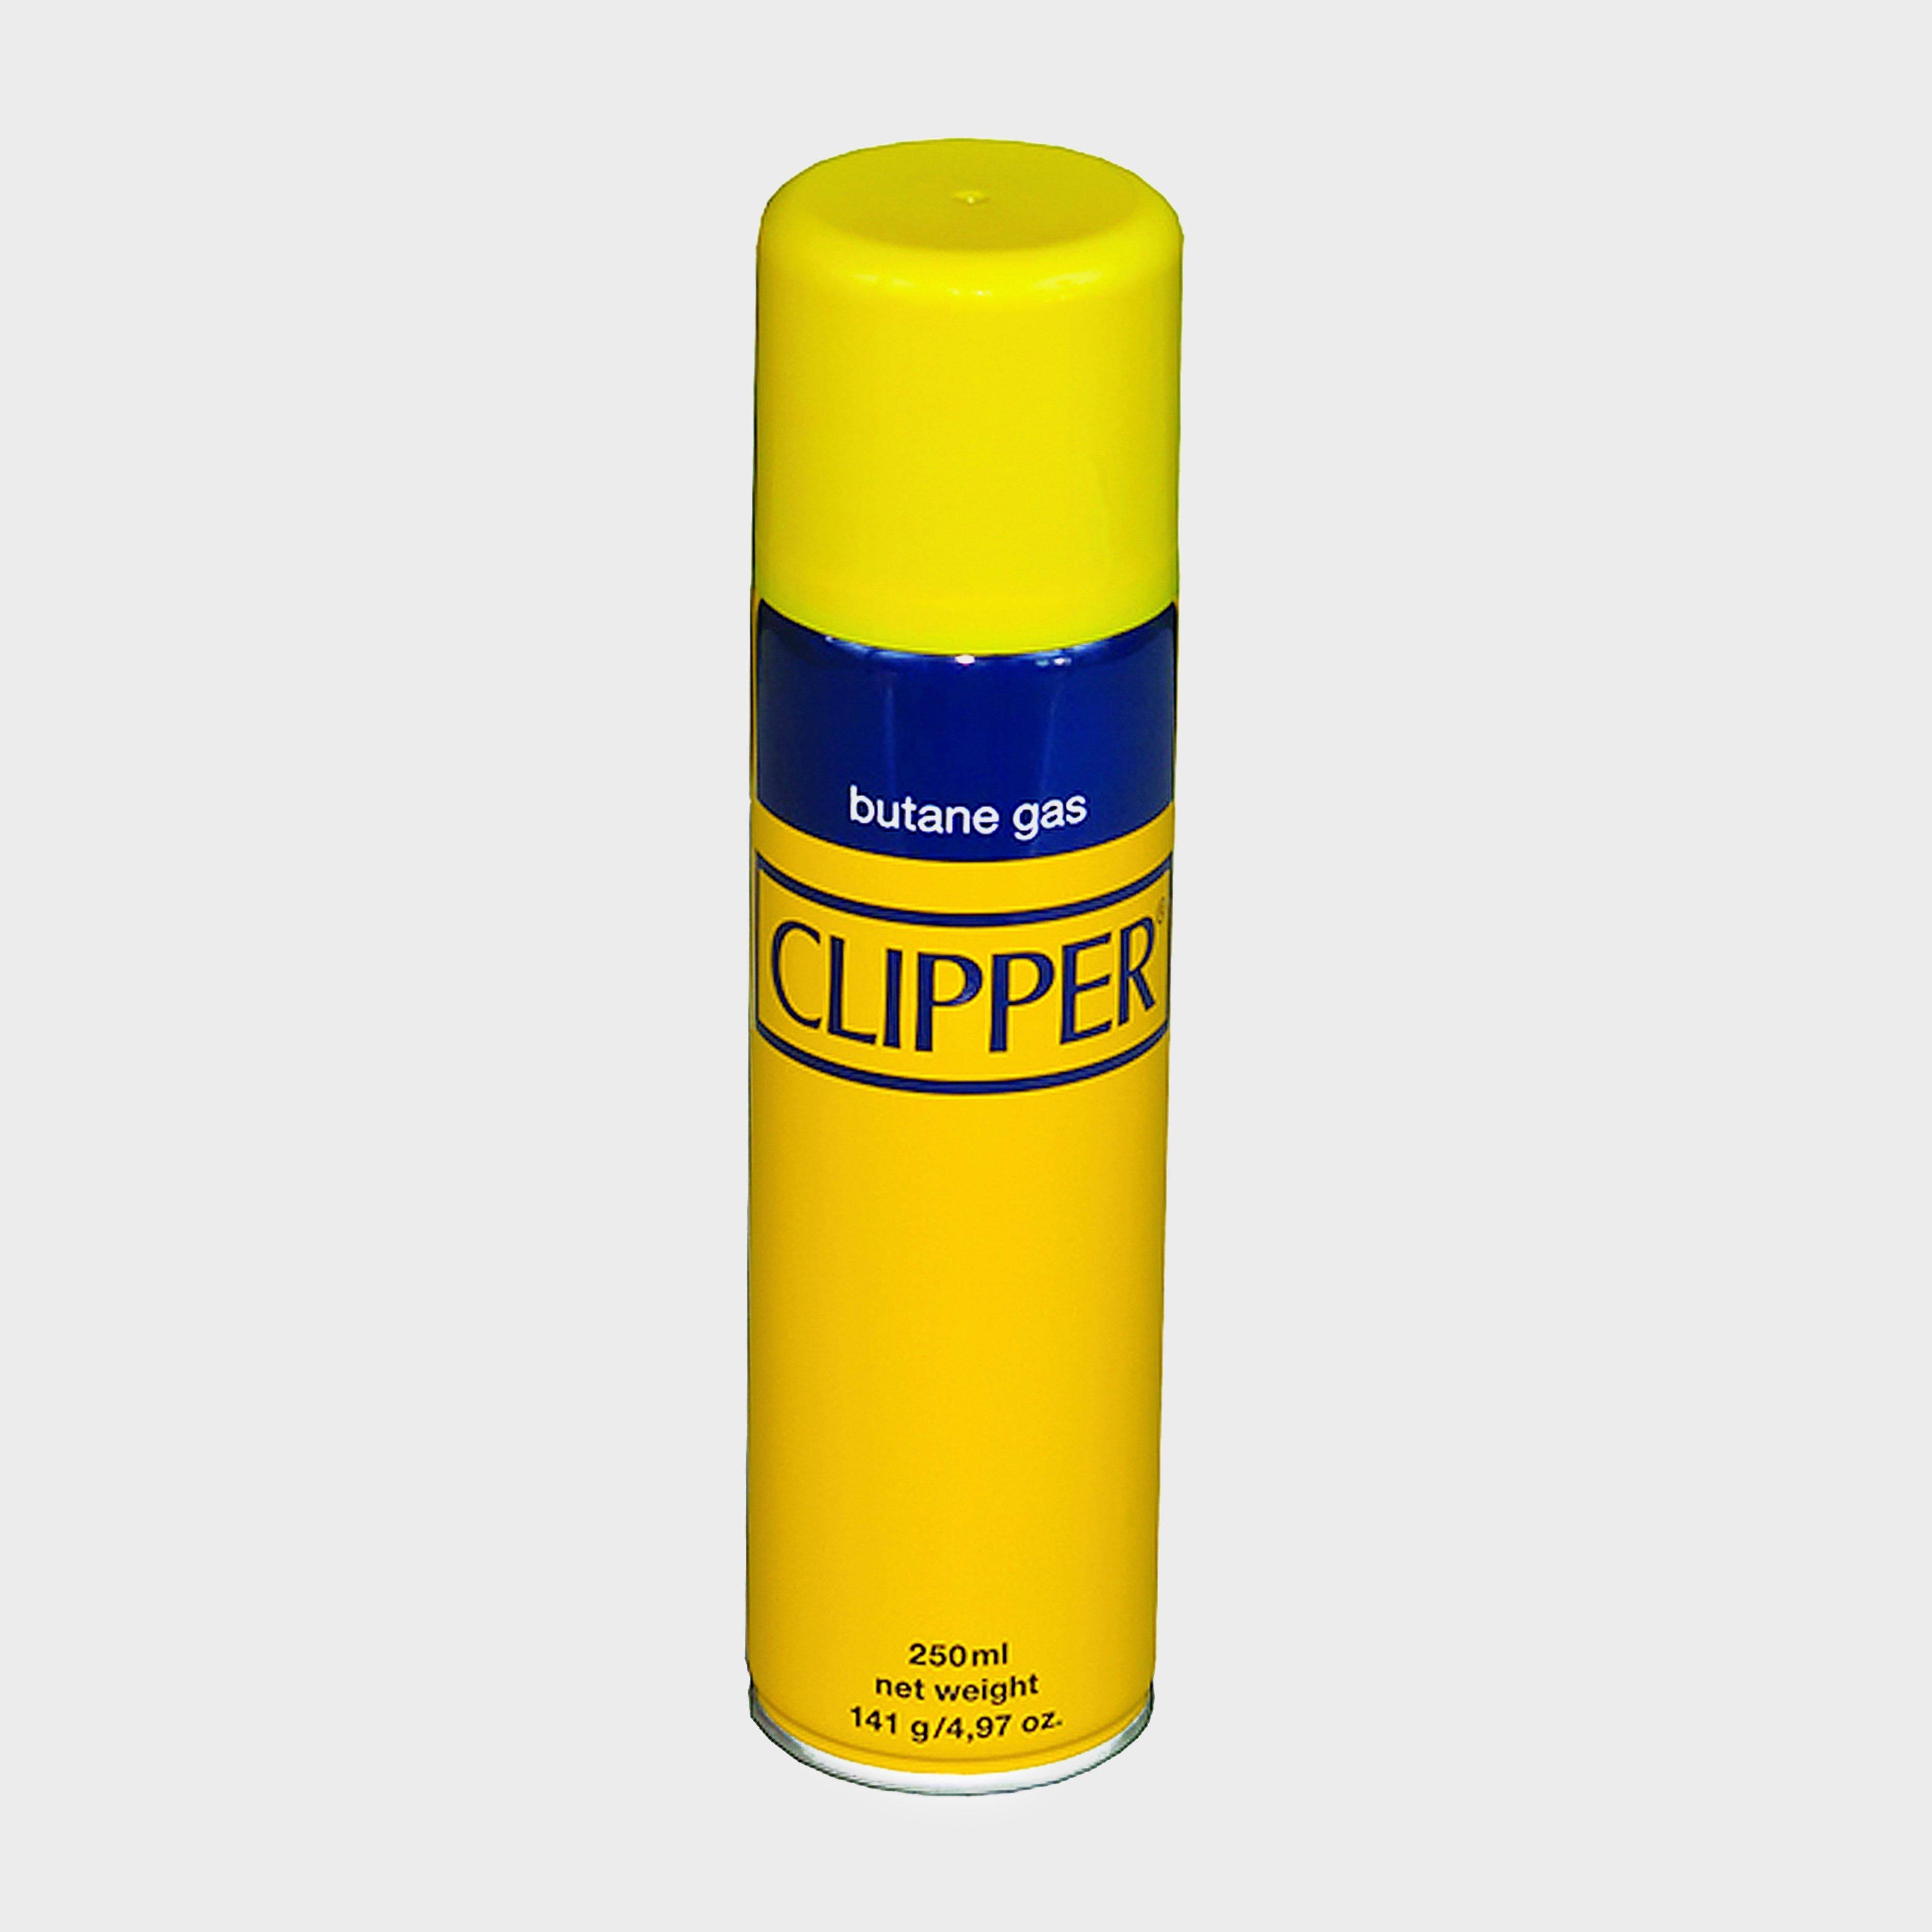 Clipper Universal Refill Gas, 300ml - 674853 - Packaging May Vary